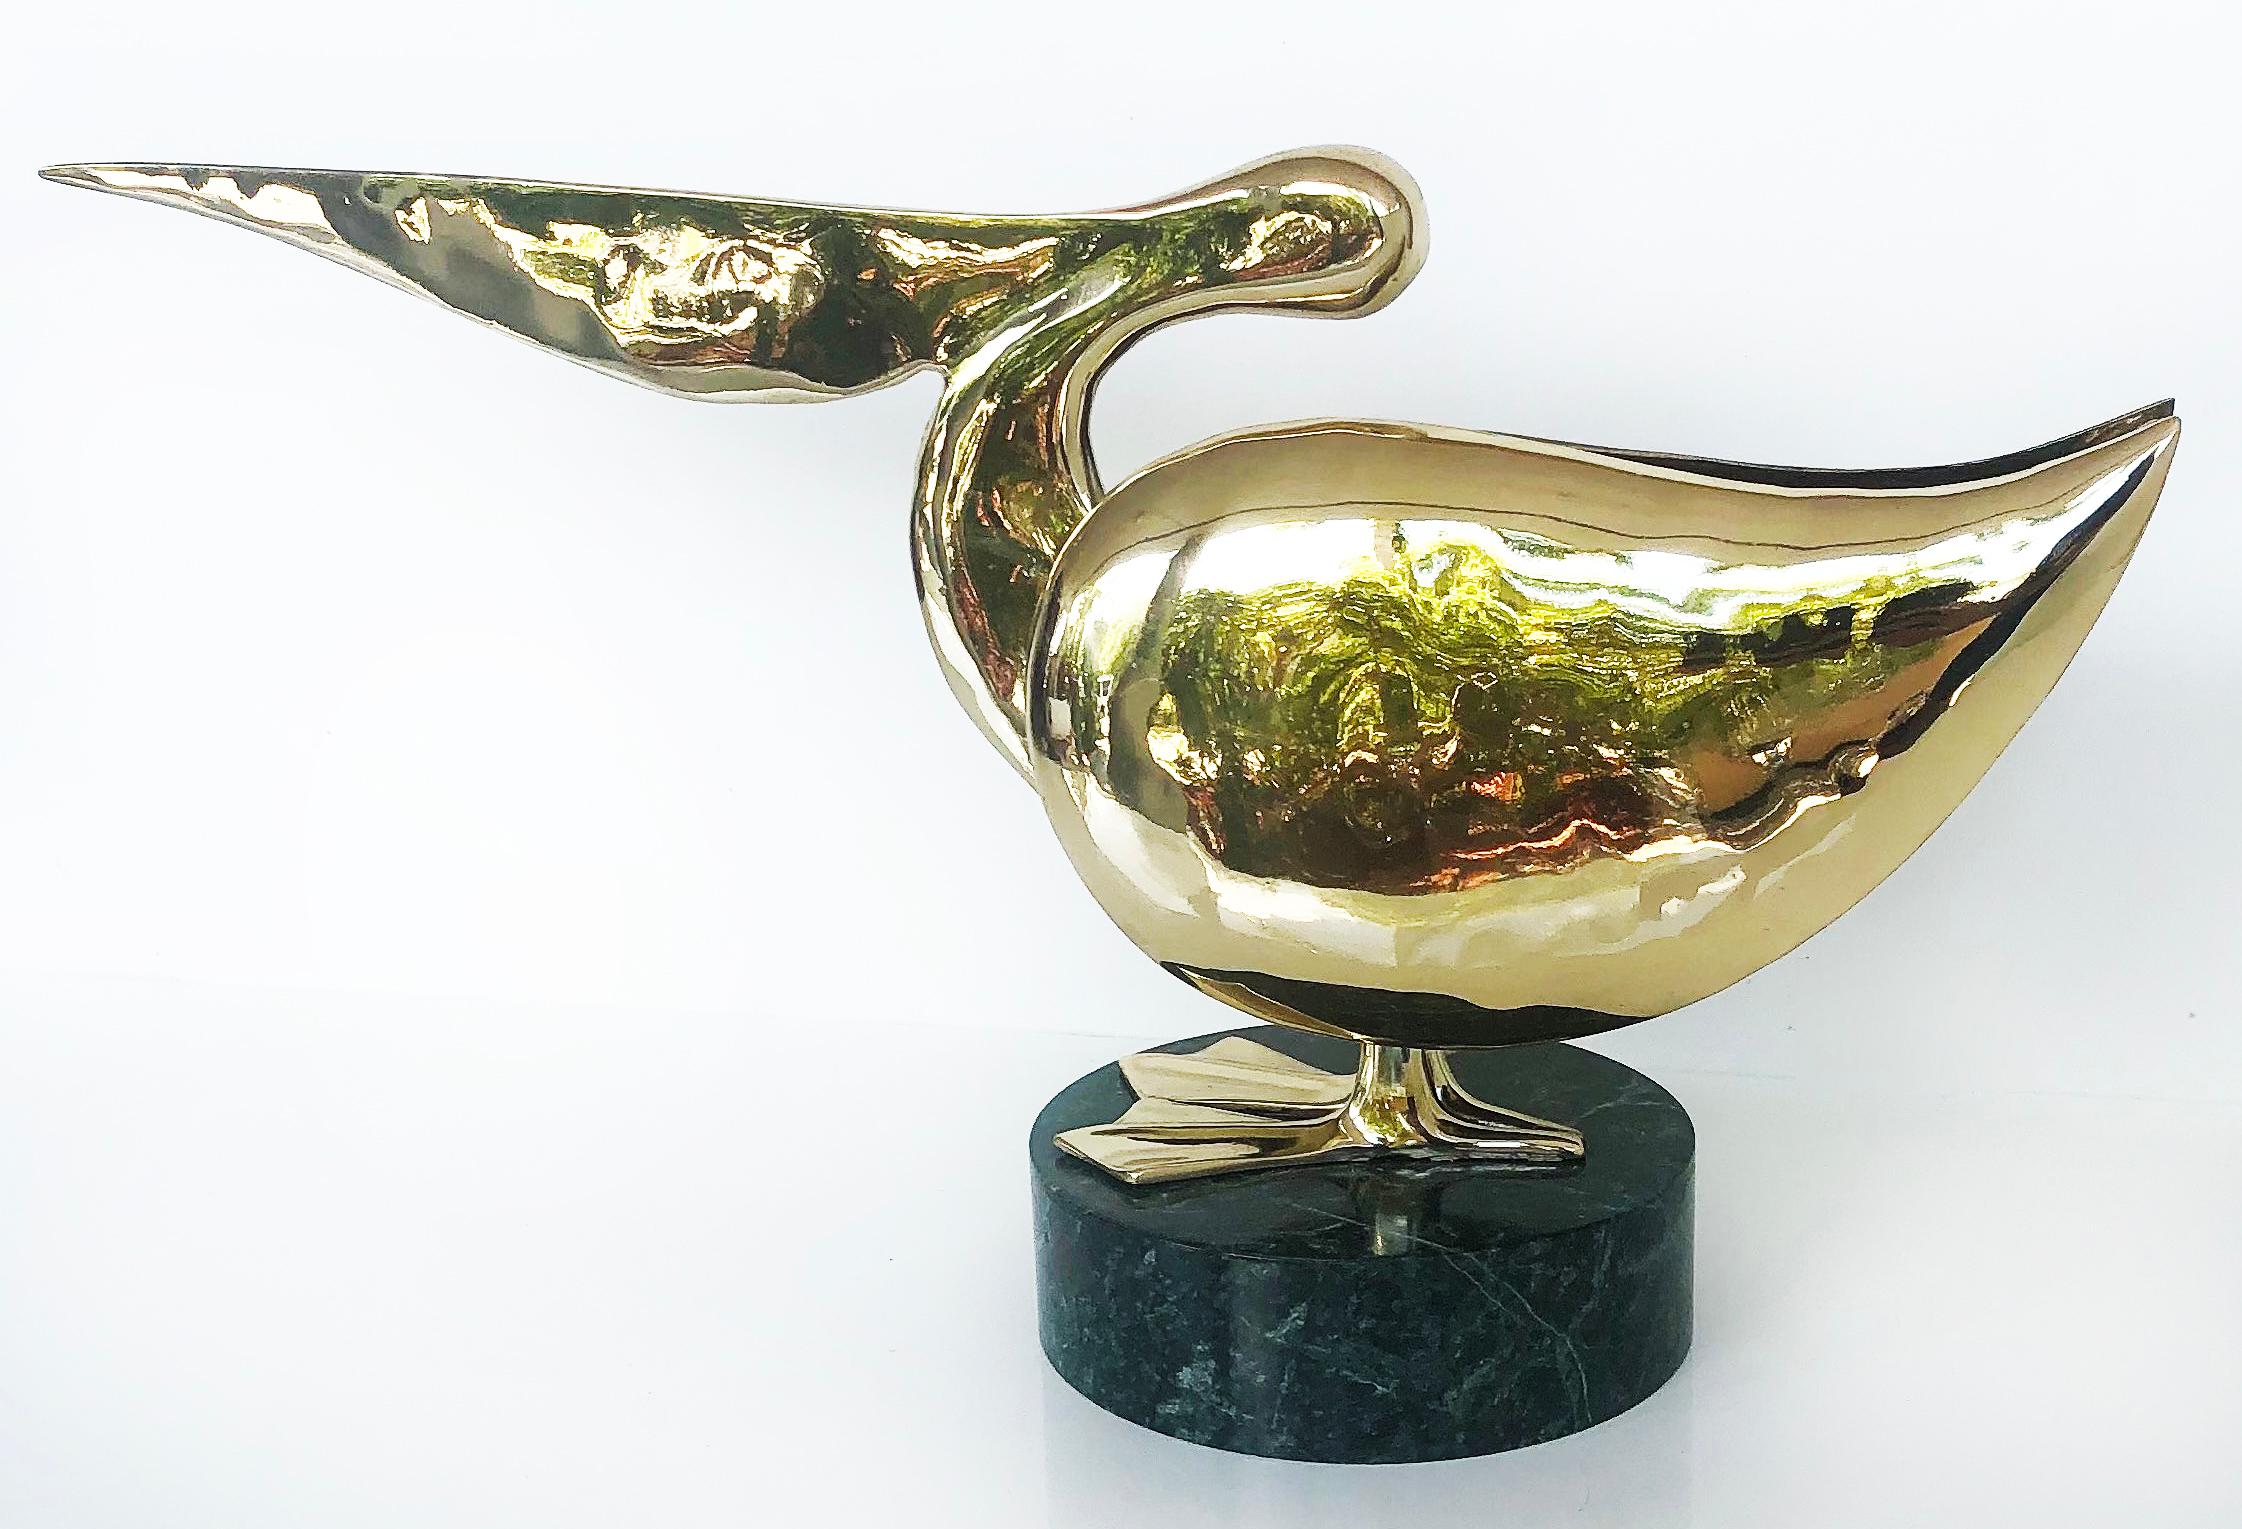 Polished brass stylized pelican sculpture on marble base

Offered is a substantially sized polished brass stylized pelican sculpture on a green, round marble base. The sculpture will look great on a desk or on bookshelves.

  